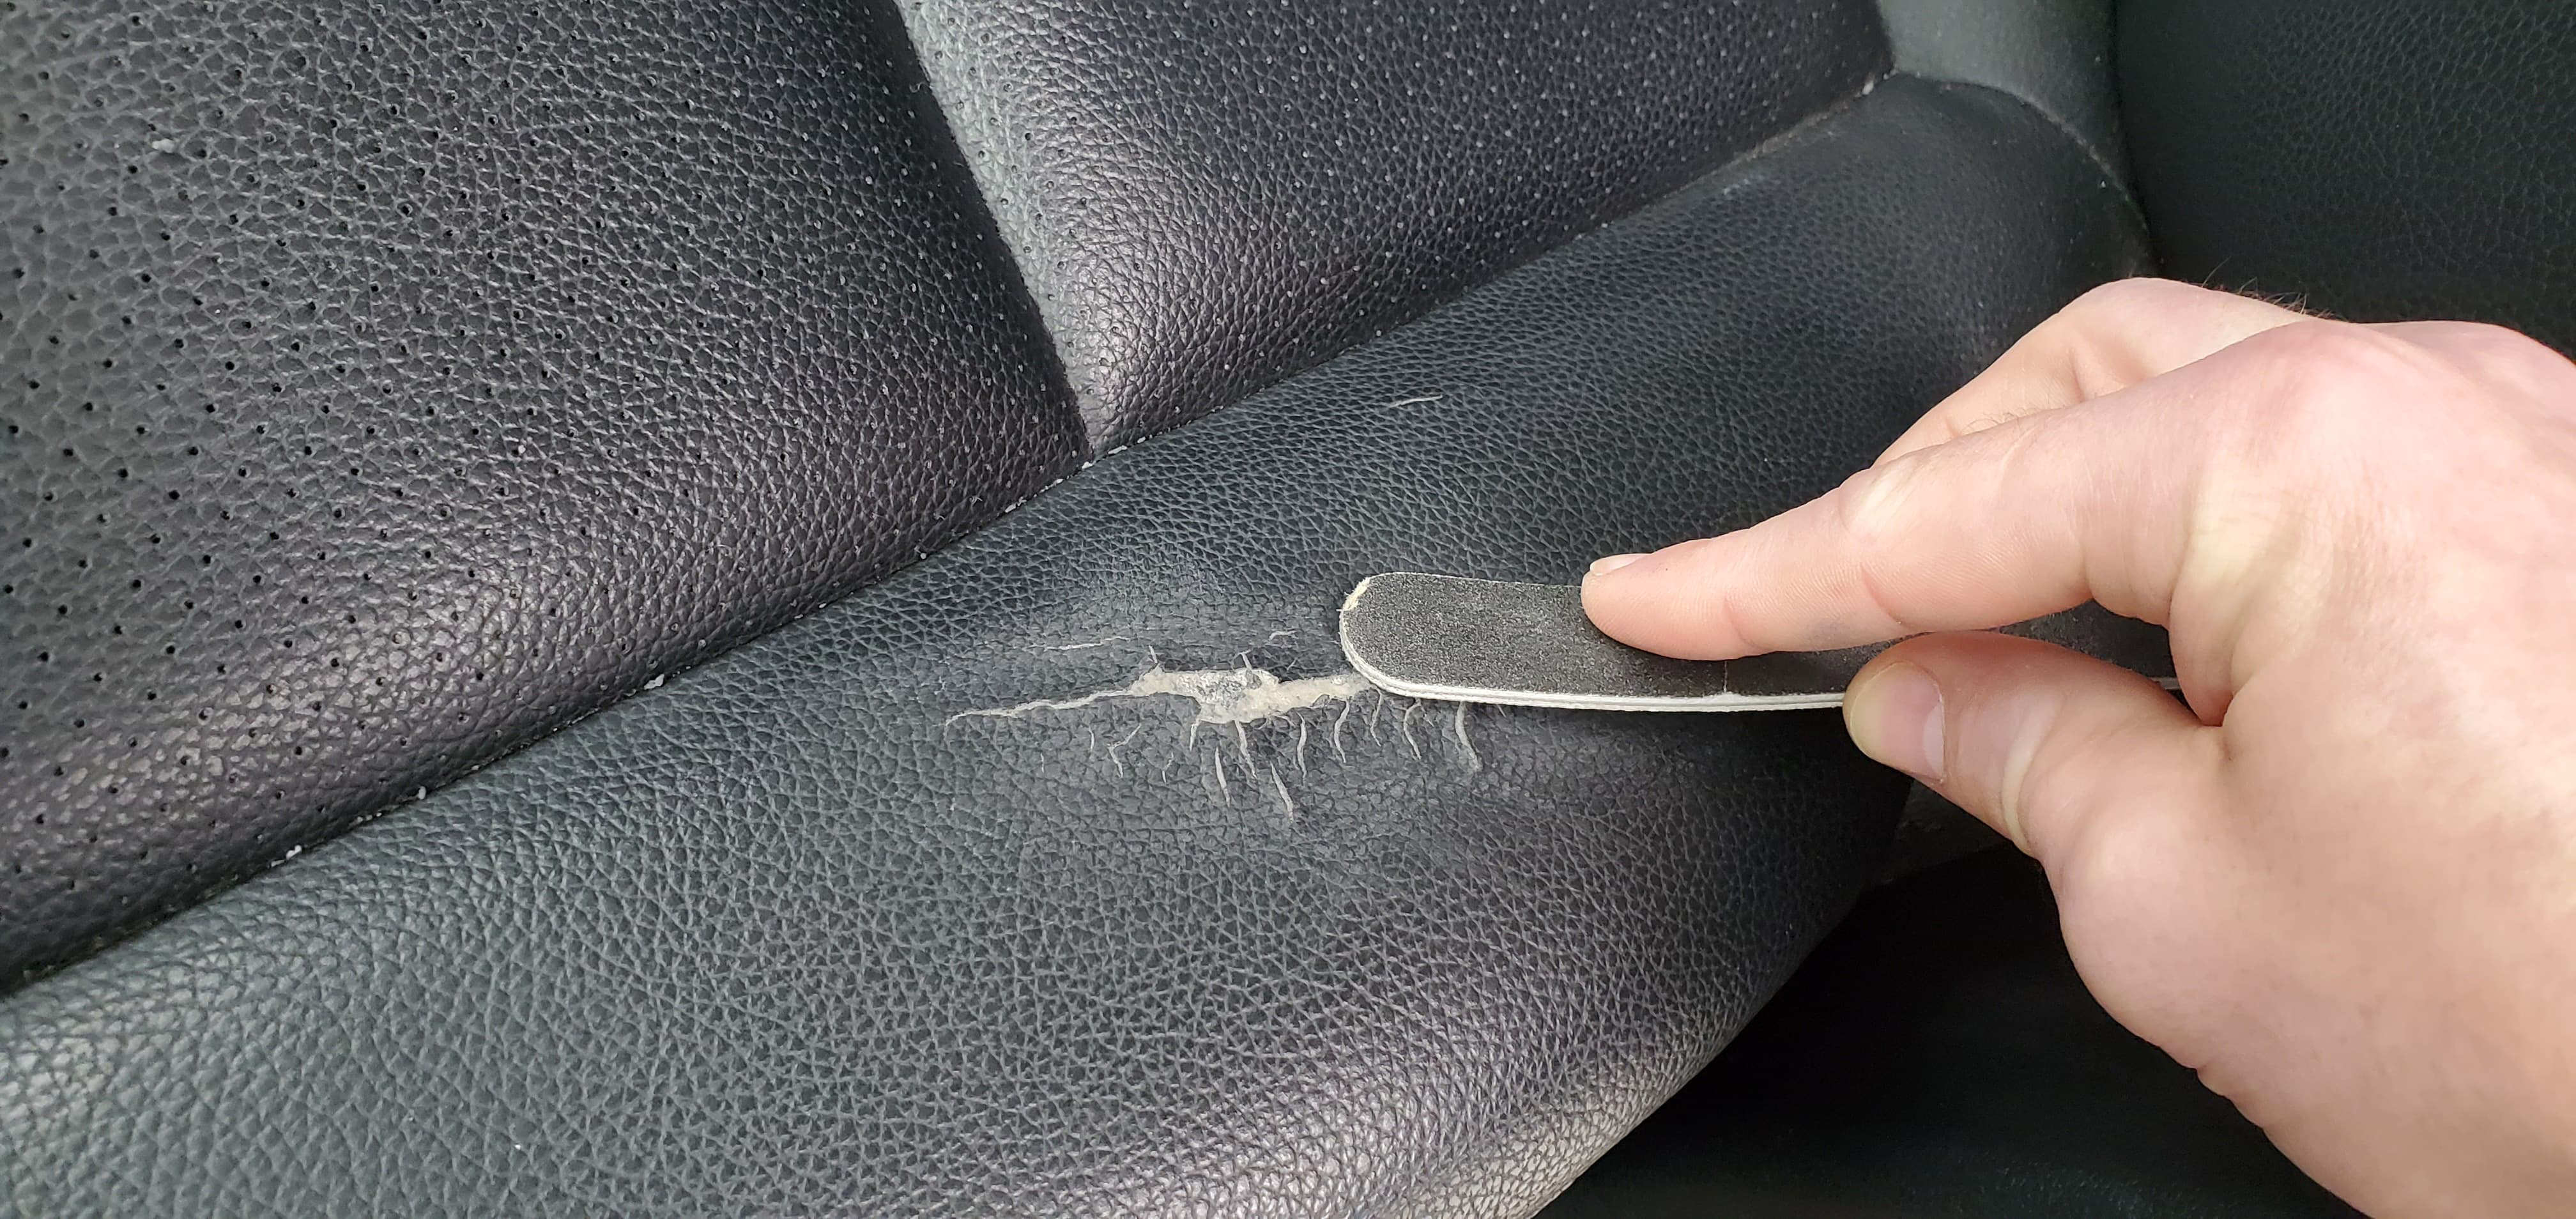 How To Repair A Leather Car Seat - How To Repair A Hole In Vinyl Seat